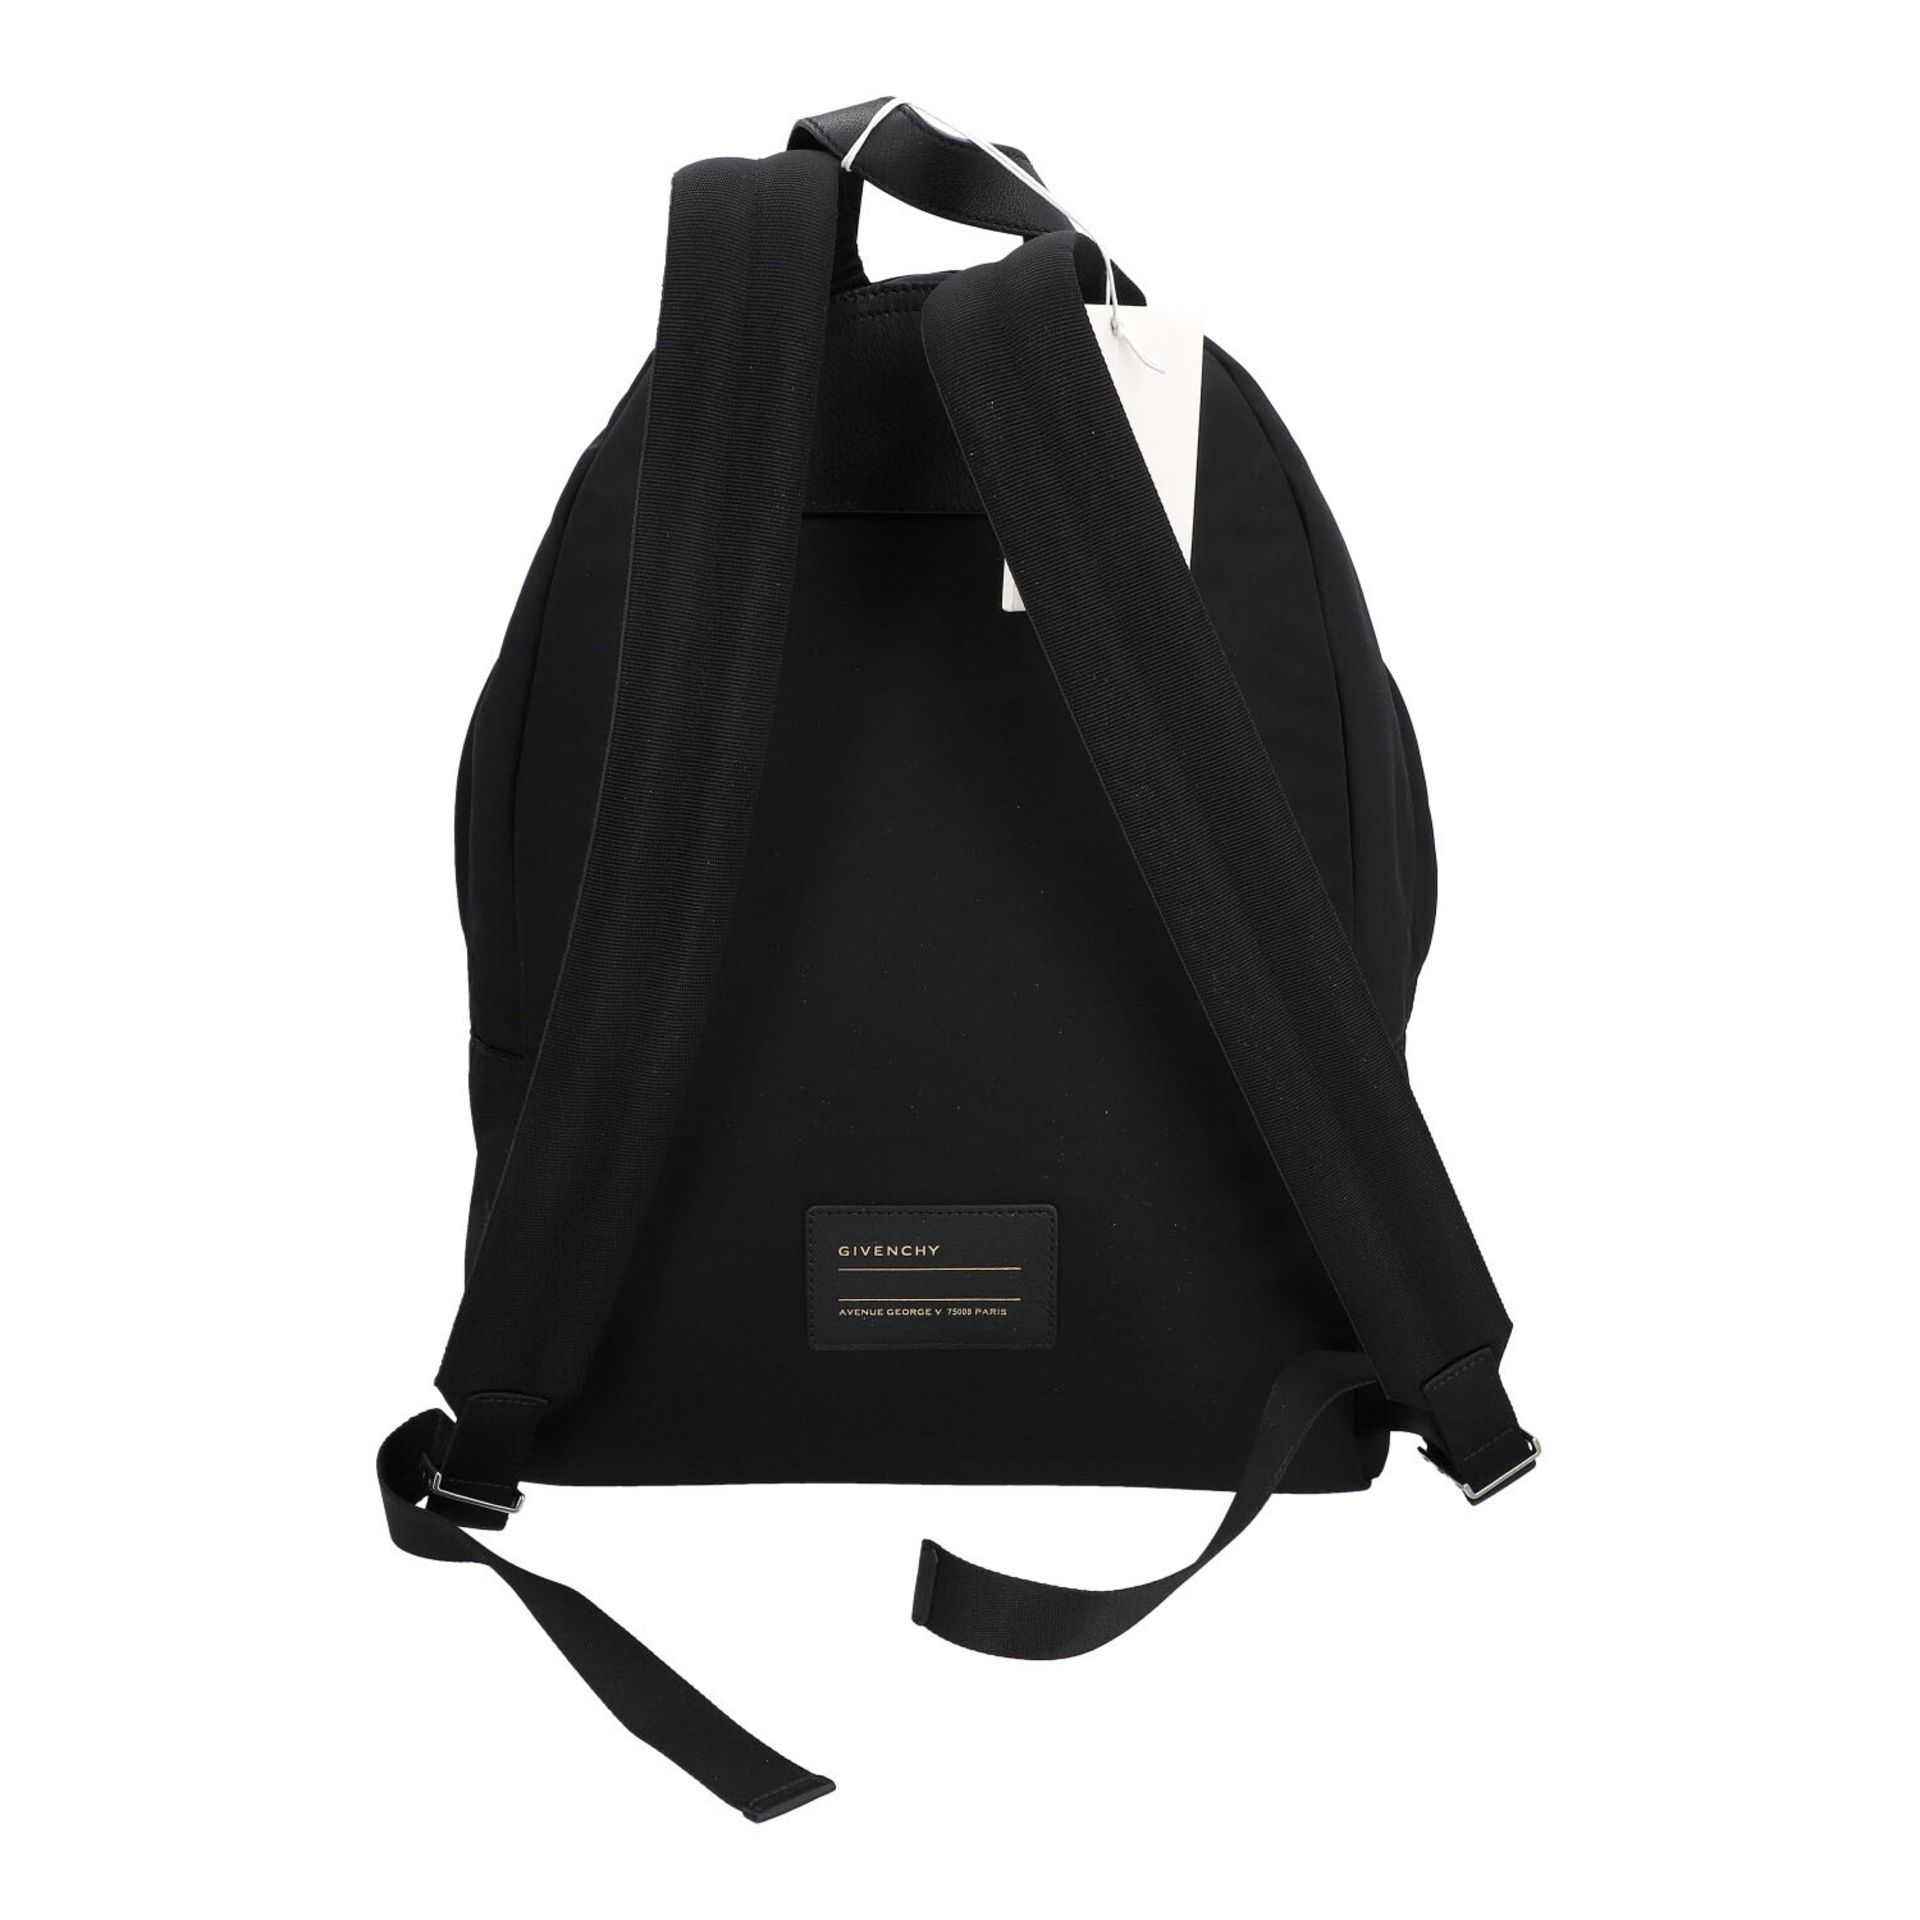 GIVENCHY Rucksack "MAD LOVE TOUR". - Image 4 of 8